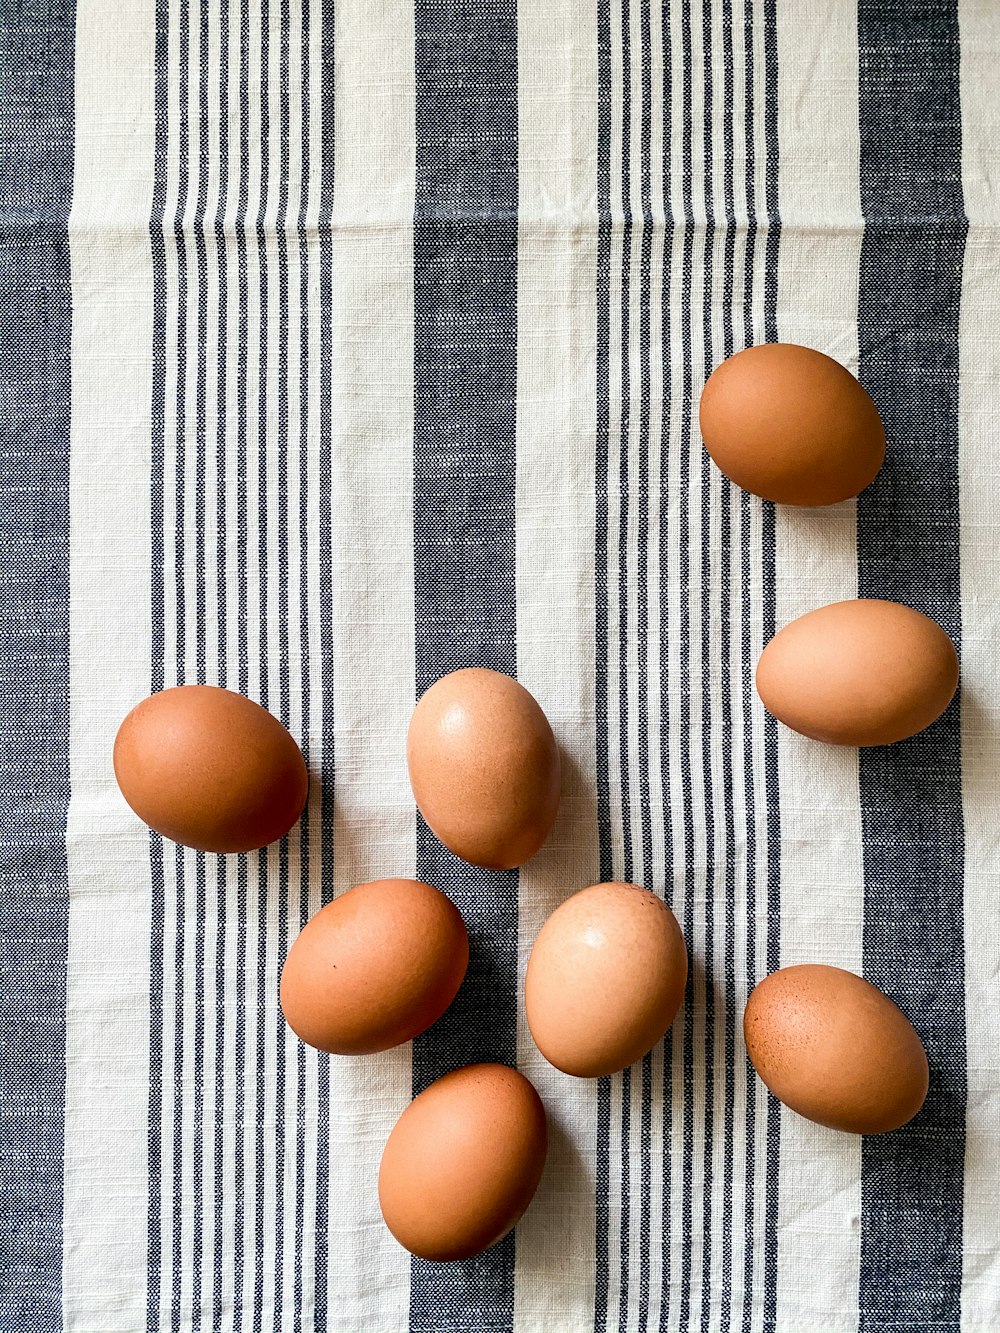 brown egg on blue and white plaid textile